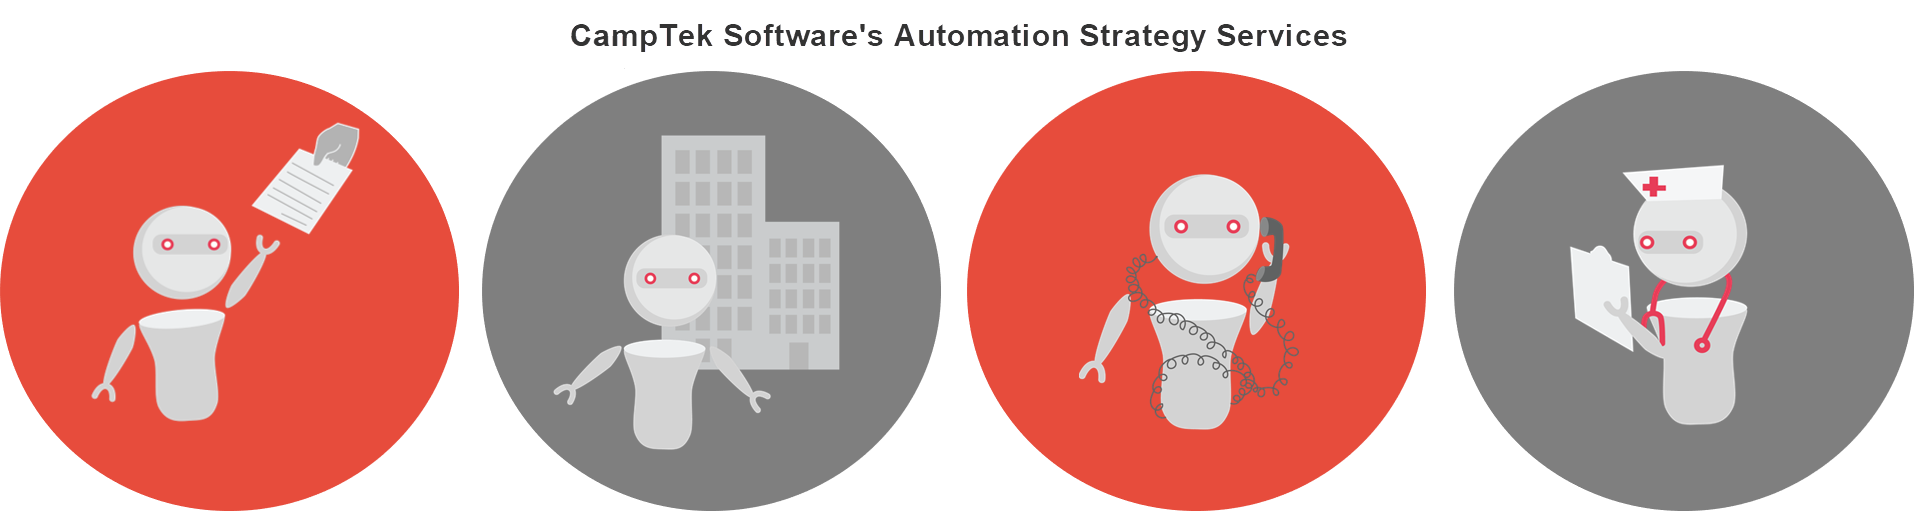 Automation Strategy Services